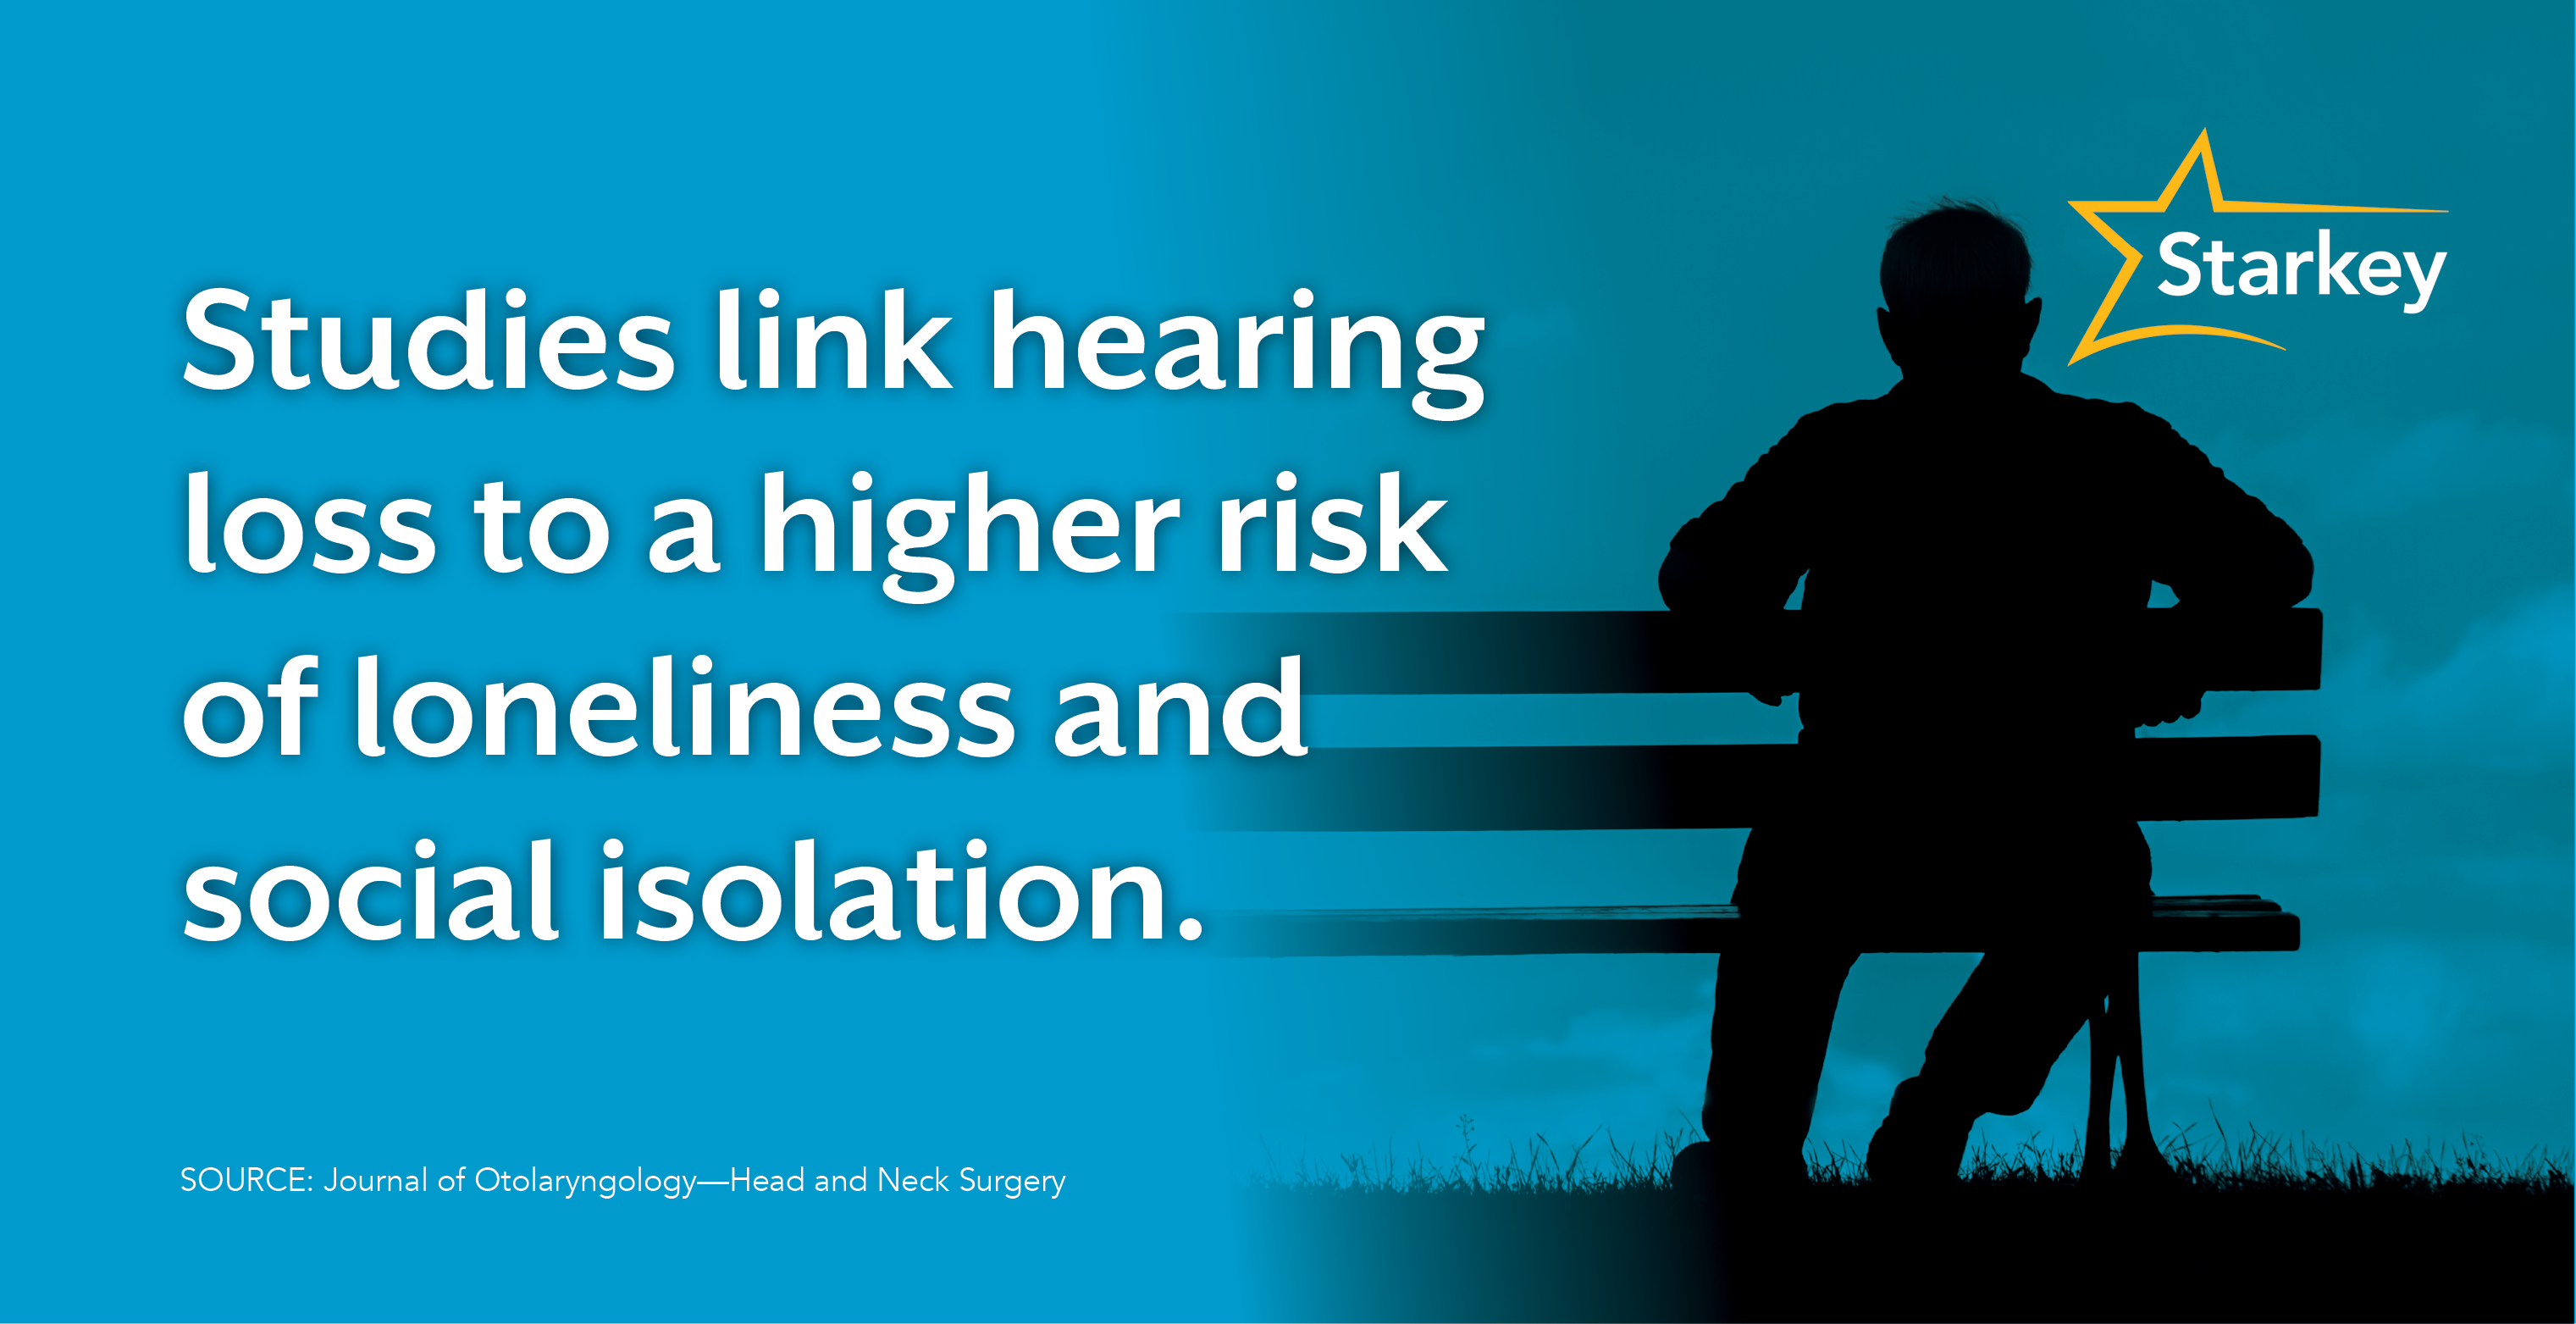 Image of study that says "studies link hearing loss to a higher risk of loneliness and social isolation"